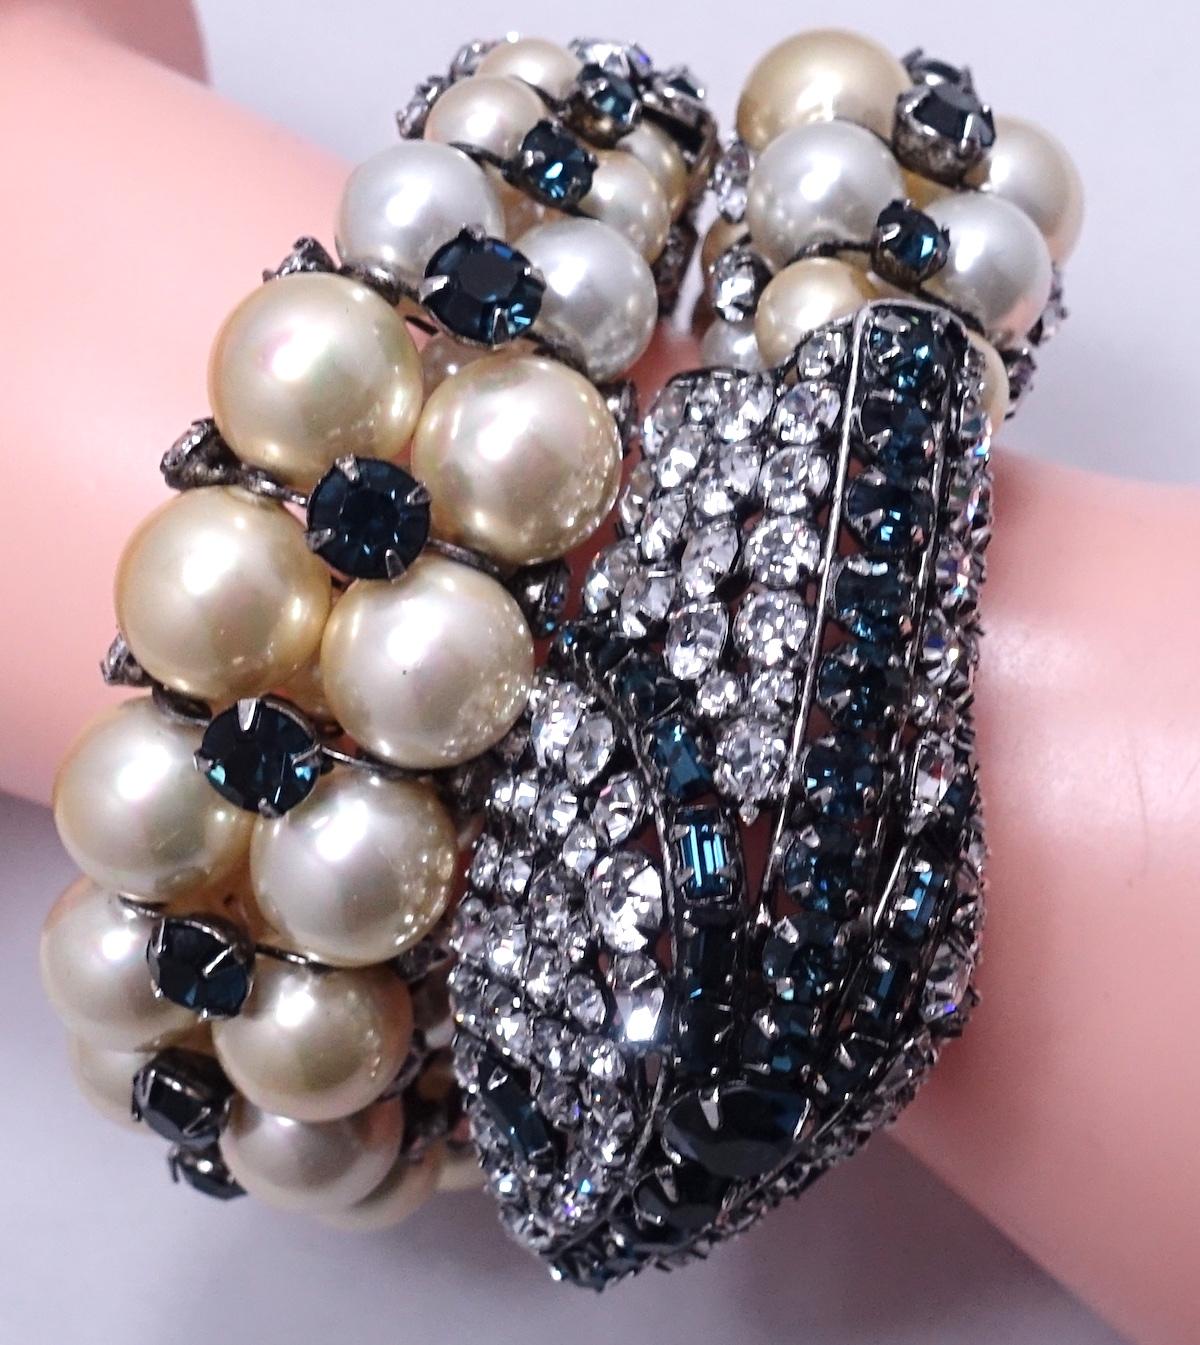 This is such an incredible vintage piece by Iradj Moini.  The bracelet features faux pearls with shimmering clear and black crystals in a gold tone setting.  The snakehead measures 2-1/2” long x 1-1/4” wide; the wrap bracelet measures approx. 13”